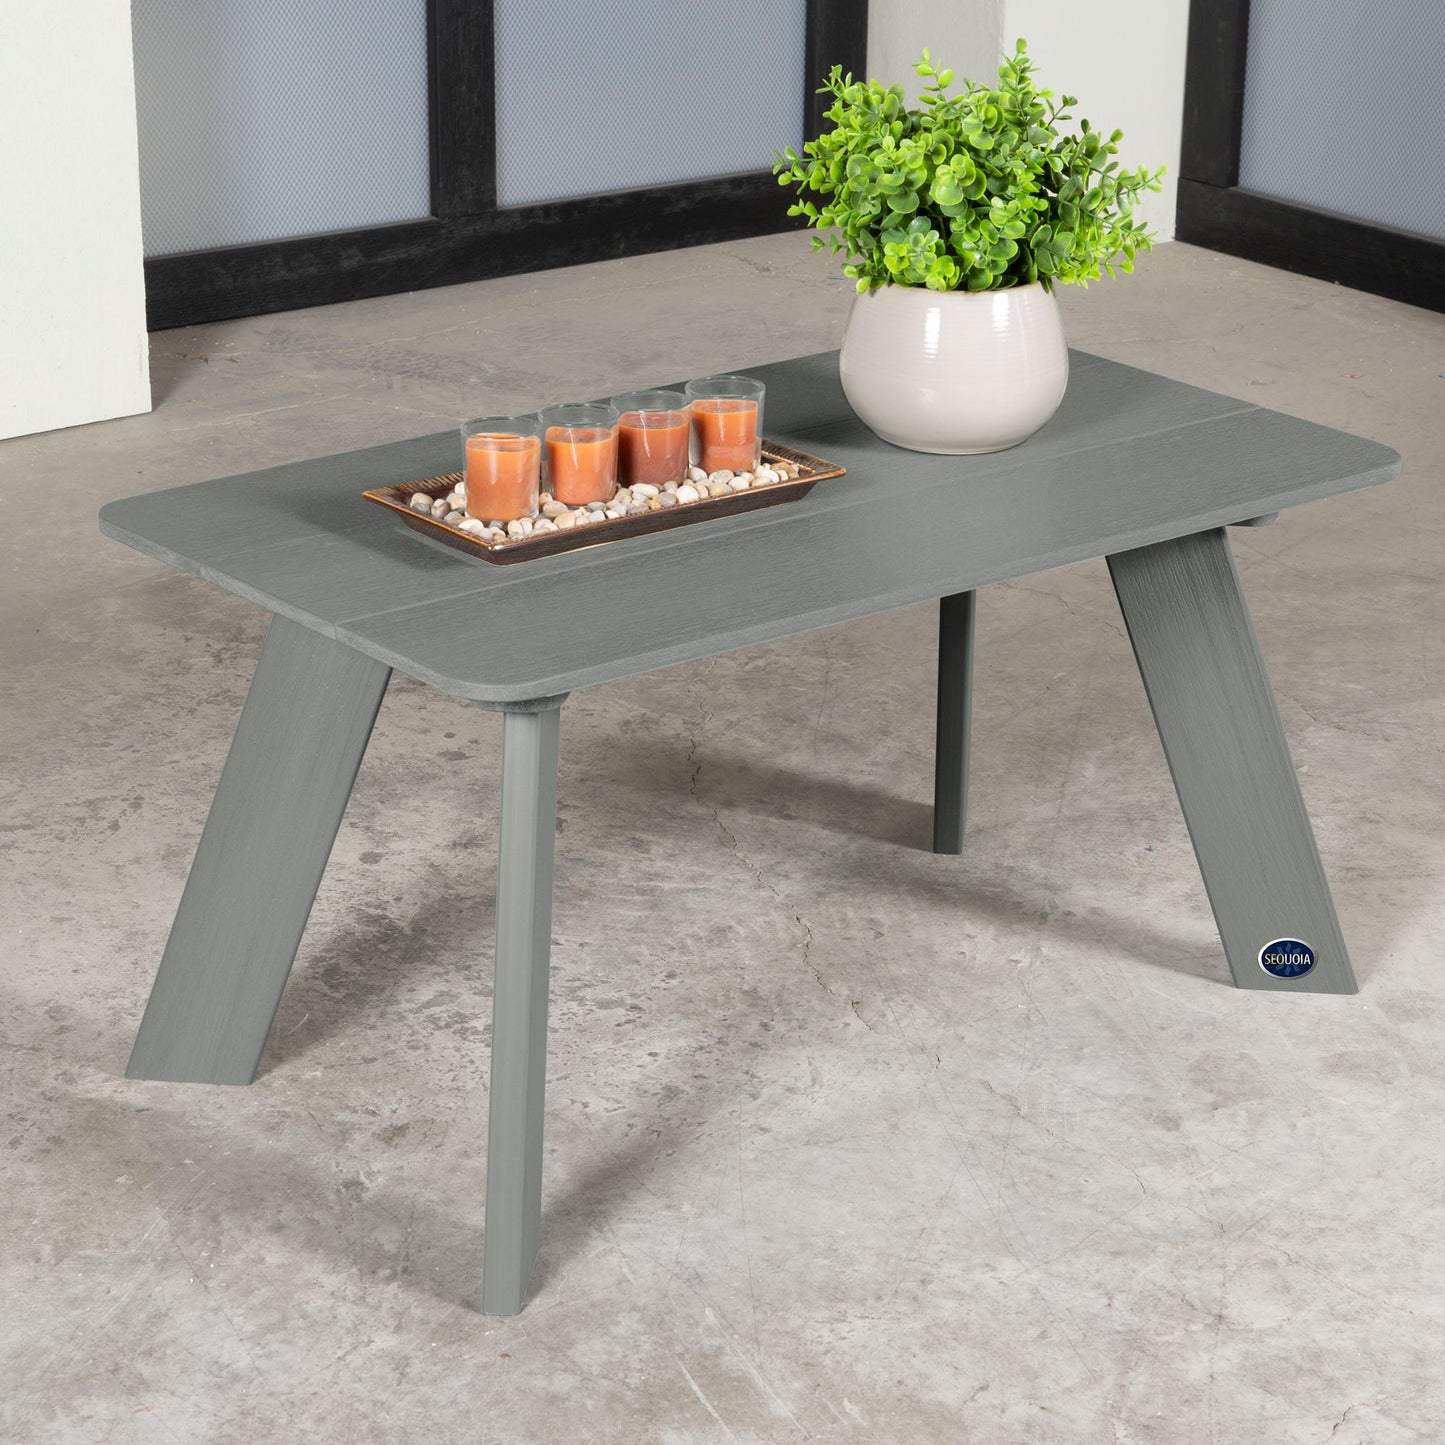 Gray Granite Hills coffee table with candles and plant